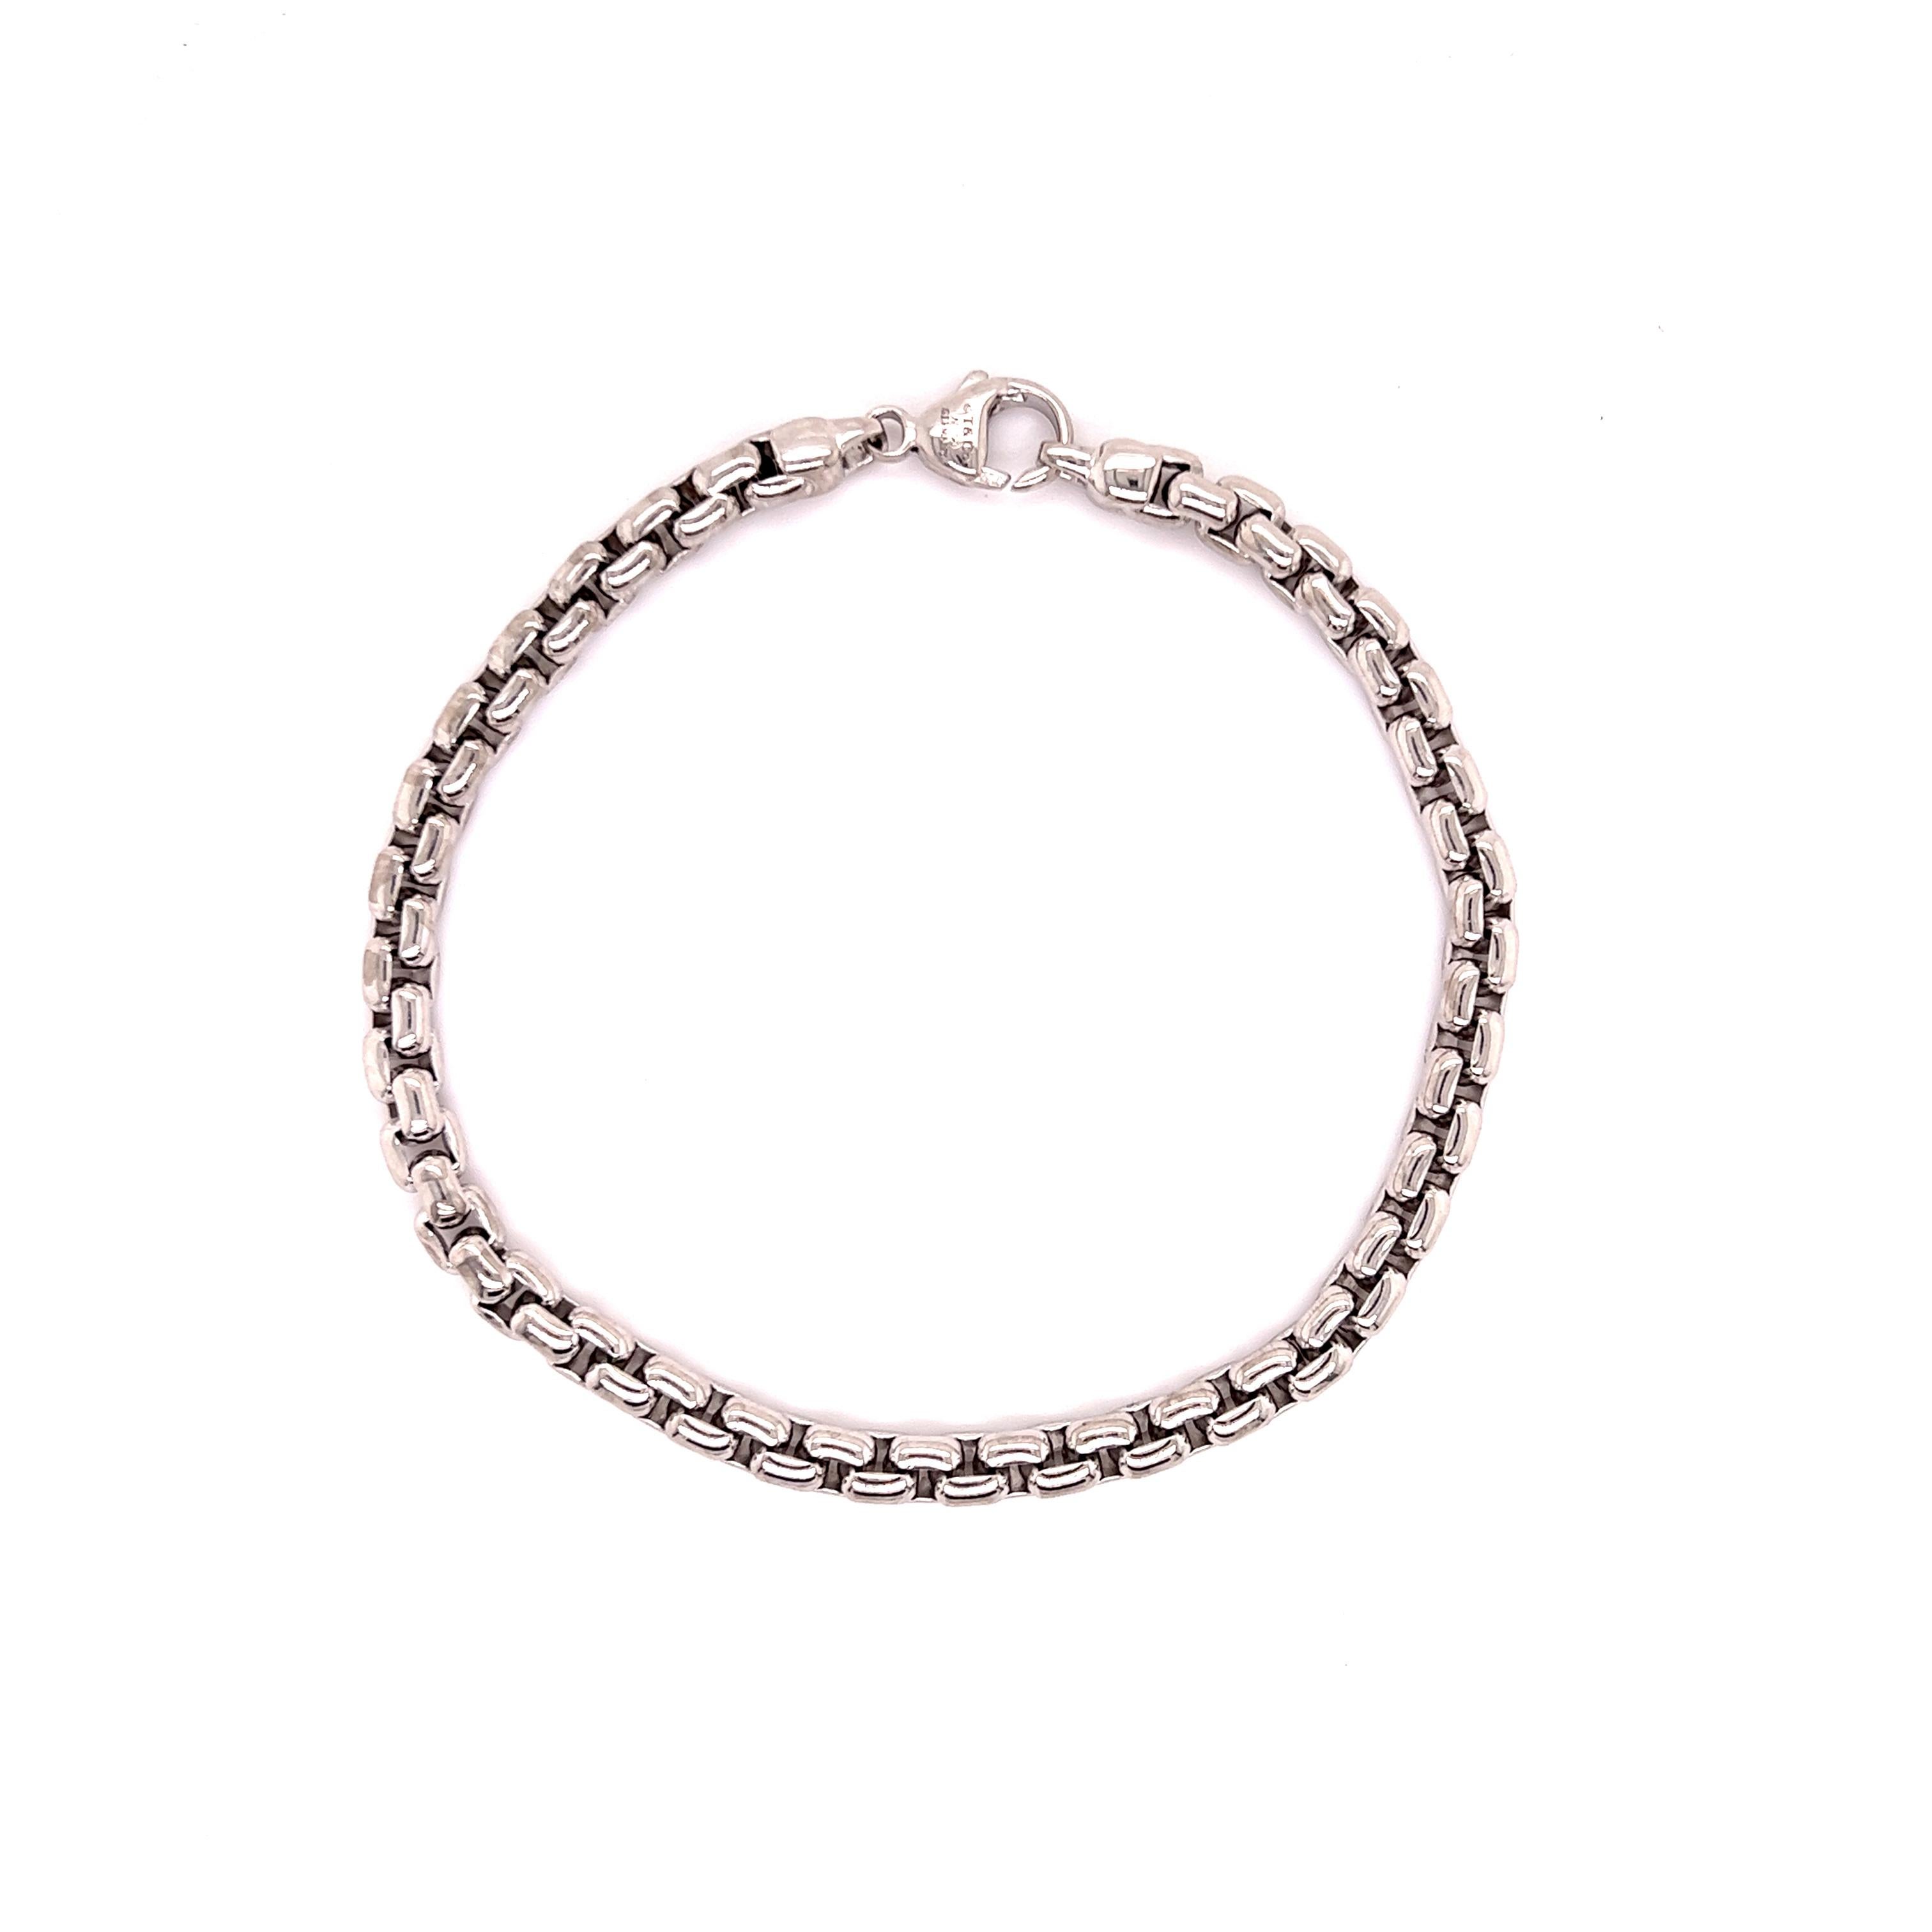 Great every day bracelet from famed jewelry house Tiffany & Co. The bracelet is crafted in solid 18k white gold and is a box link design. The bracelet measures 8